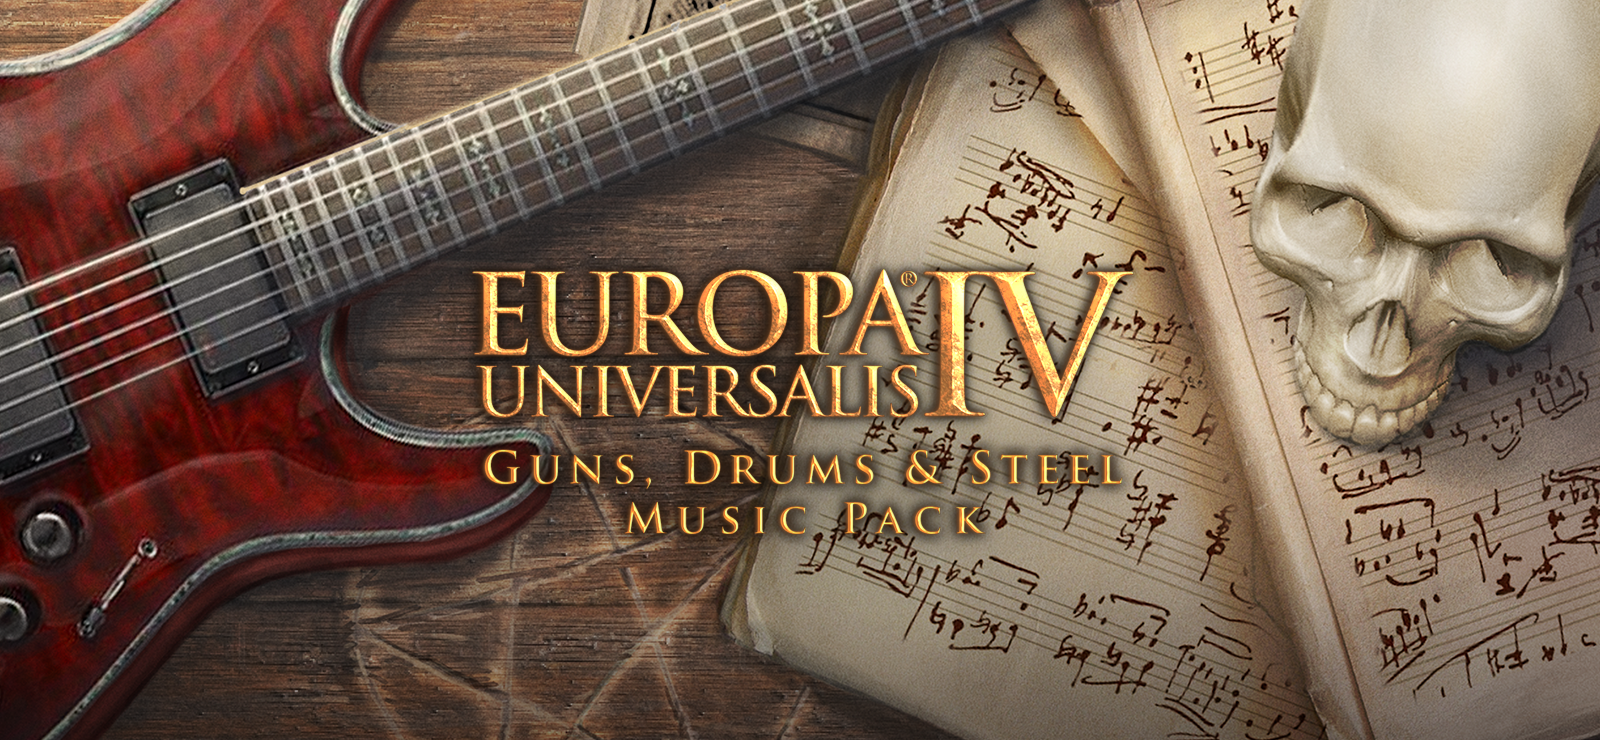 Europa Universalis IV: Guns, Drums And Steel Music Pack